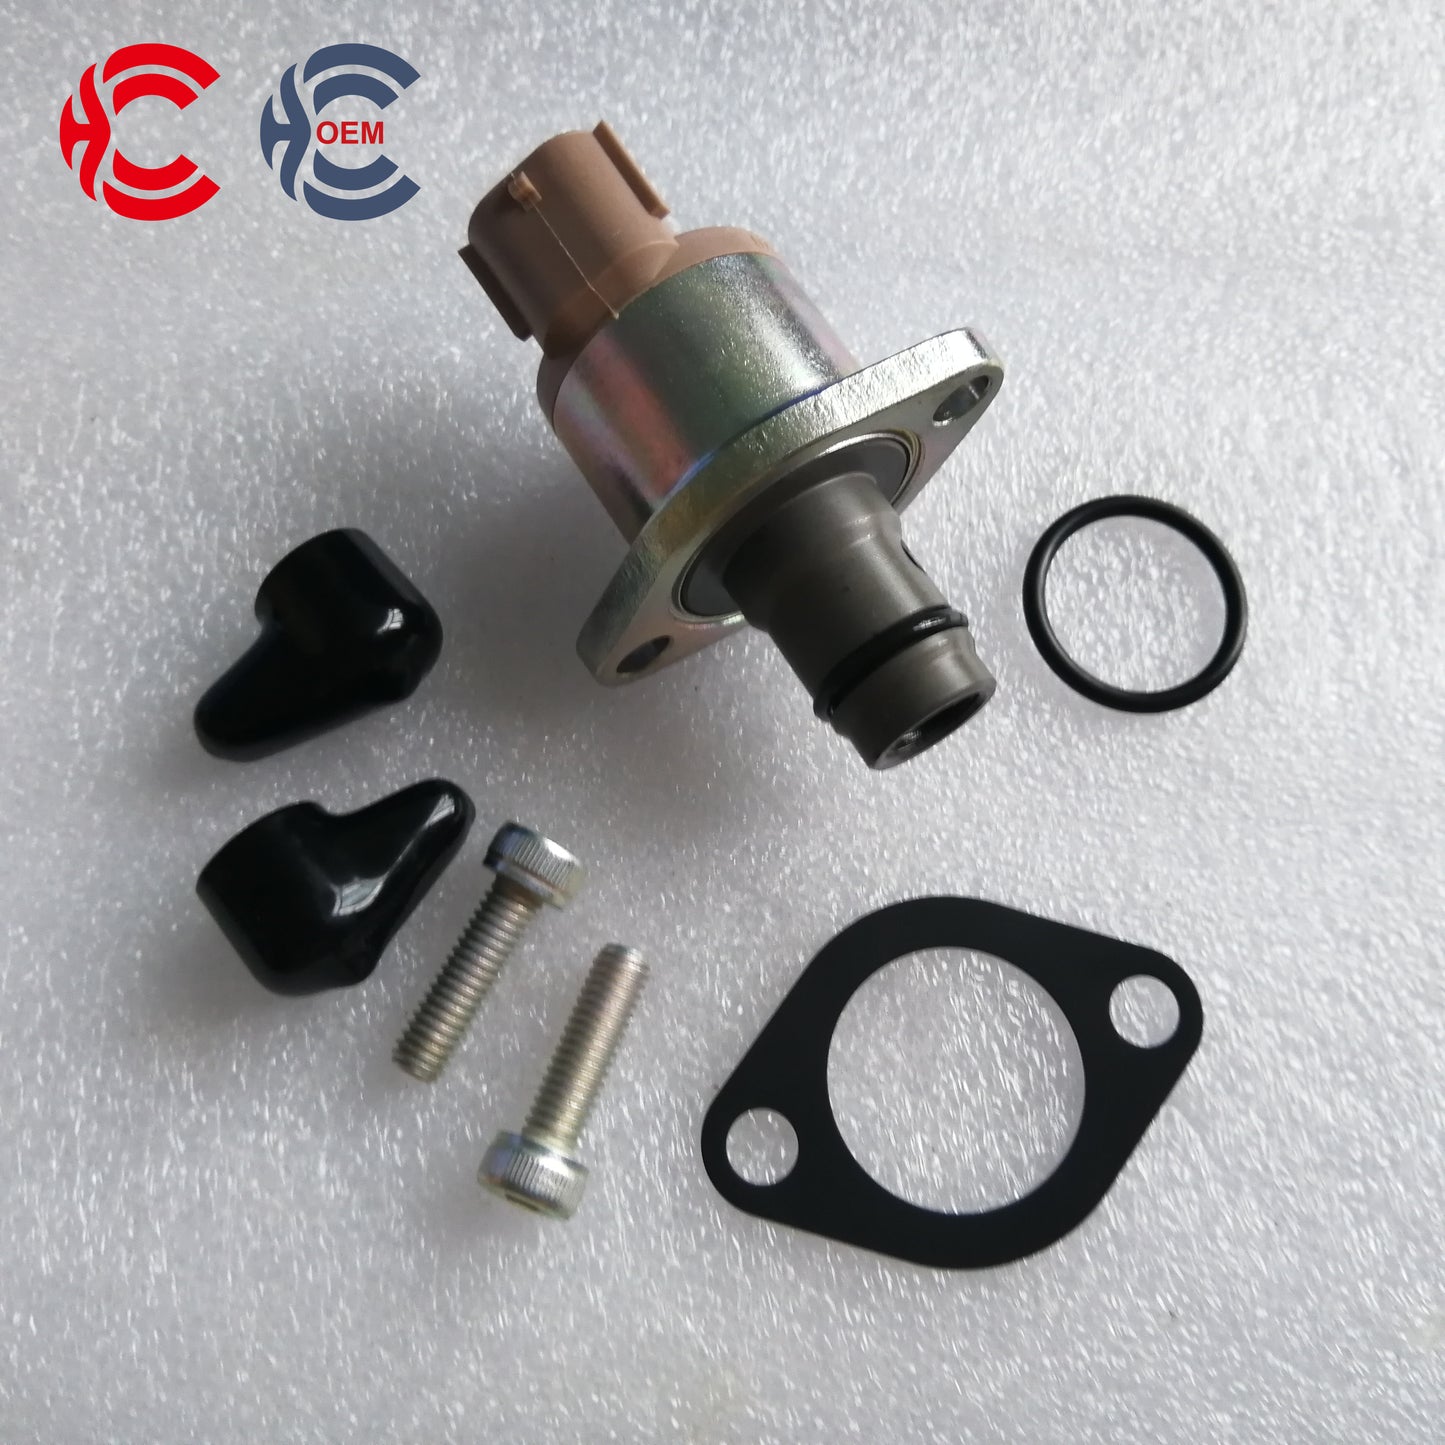 OEM: 294200-0310 294009-1380 04226-0L040Material: ABS metalColor: black silverOrigin: Made in ChinaWeight: 300gPacking List: 1* SCV More ServiceWe can provide OEM Manufacturing serviceWe can Be your one-step solution for Auto PartsWe can provide technical scheme for you Feel Free to Contact Us, We will get back to you as soon as possible.